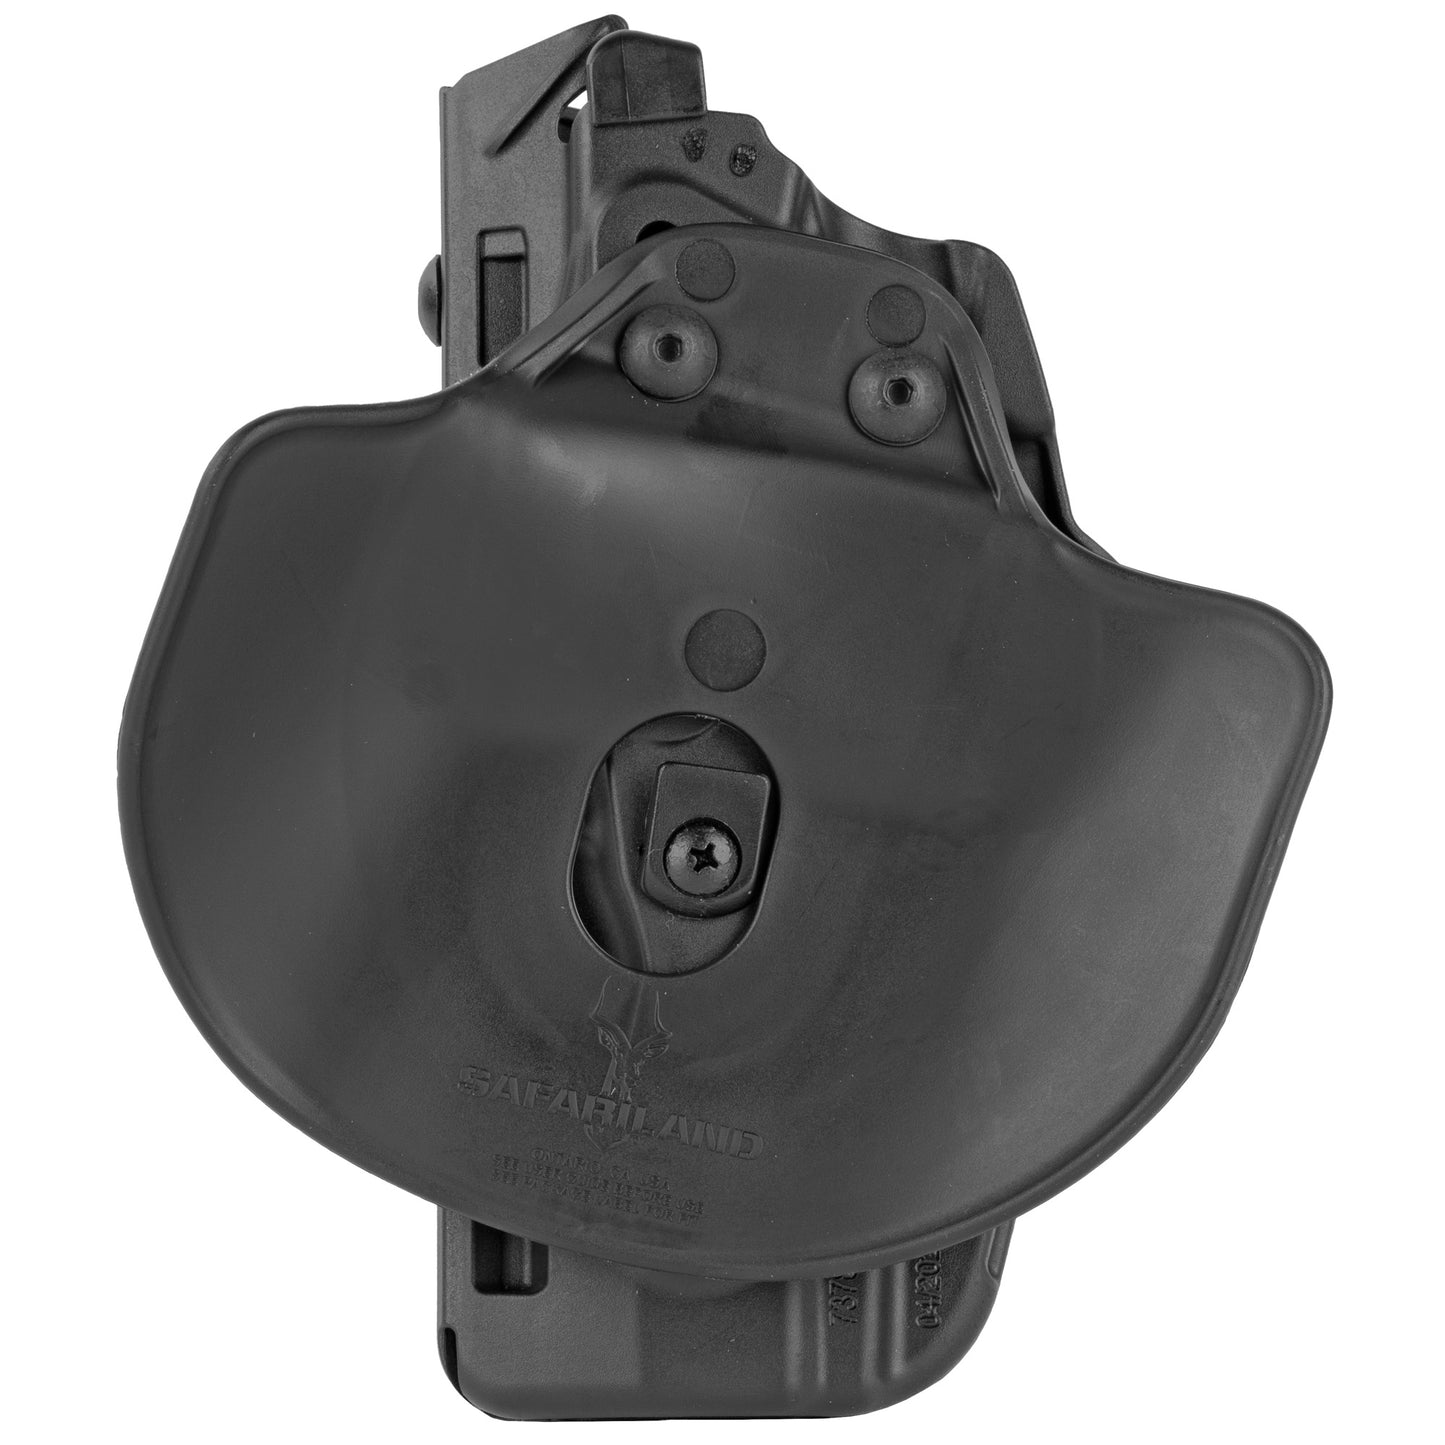 Safariland 7378, 7TS, ALS Holster Fits Sig P320 Full Size  Right  7378-450-411